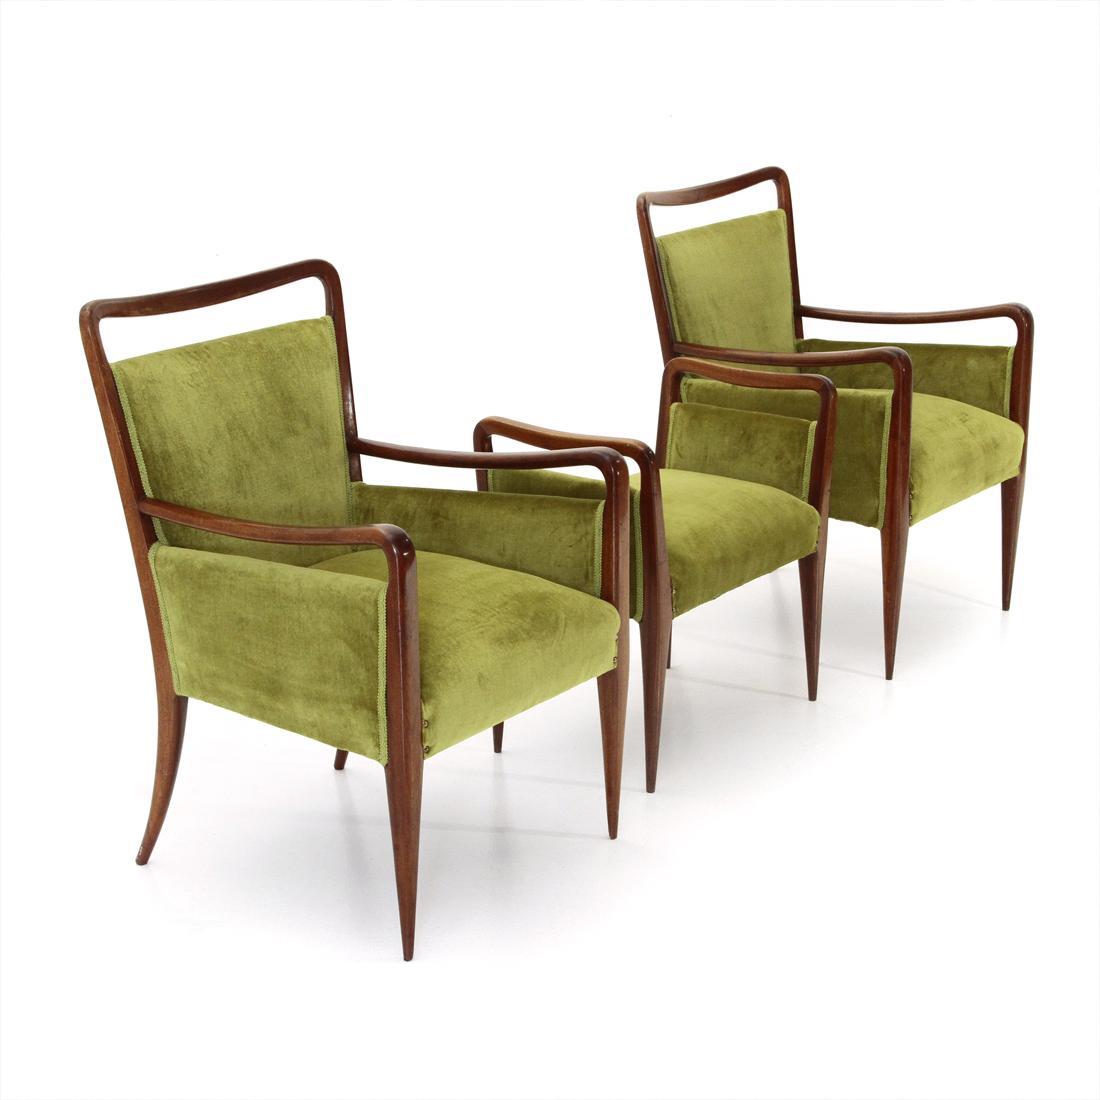 Pair of armchairs with an ottoman, of Italian manufacture produced in the 1940s.
Wooden structure.
Legs slightly curved and tapered on the finish.
Anatomical armrests and back.
Seat and back padded and lined with new green velvet fabric.
Good